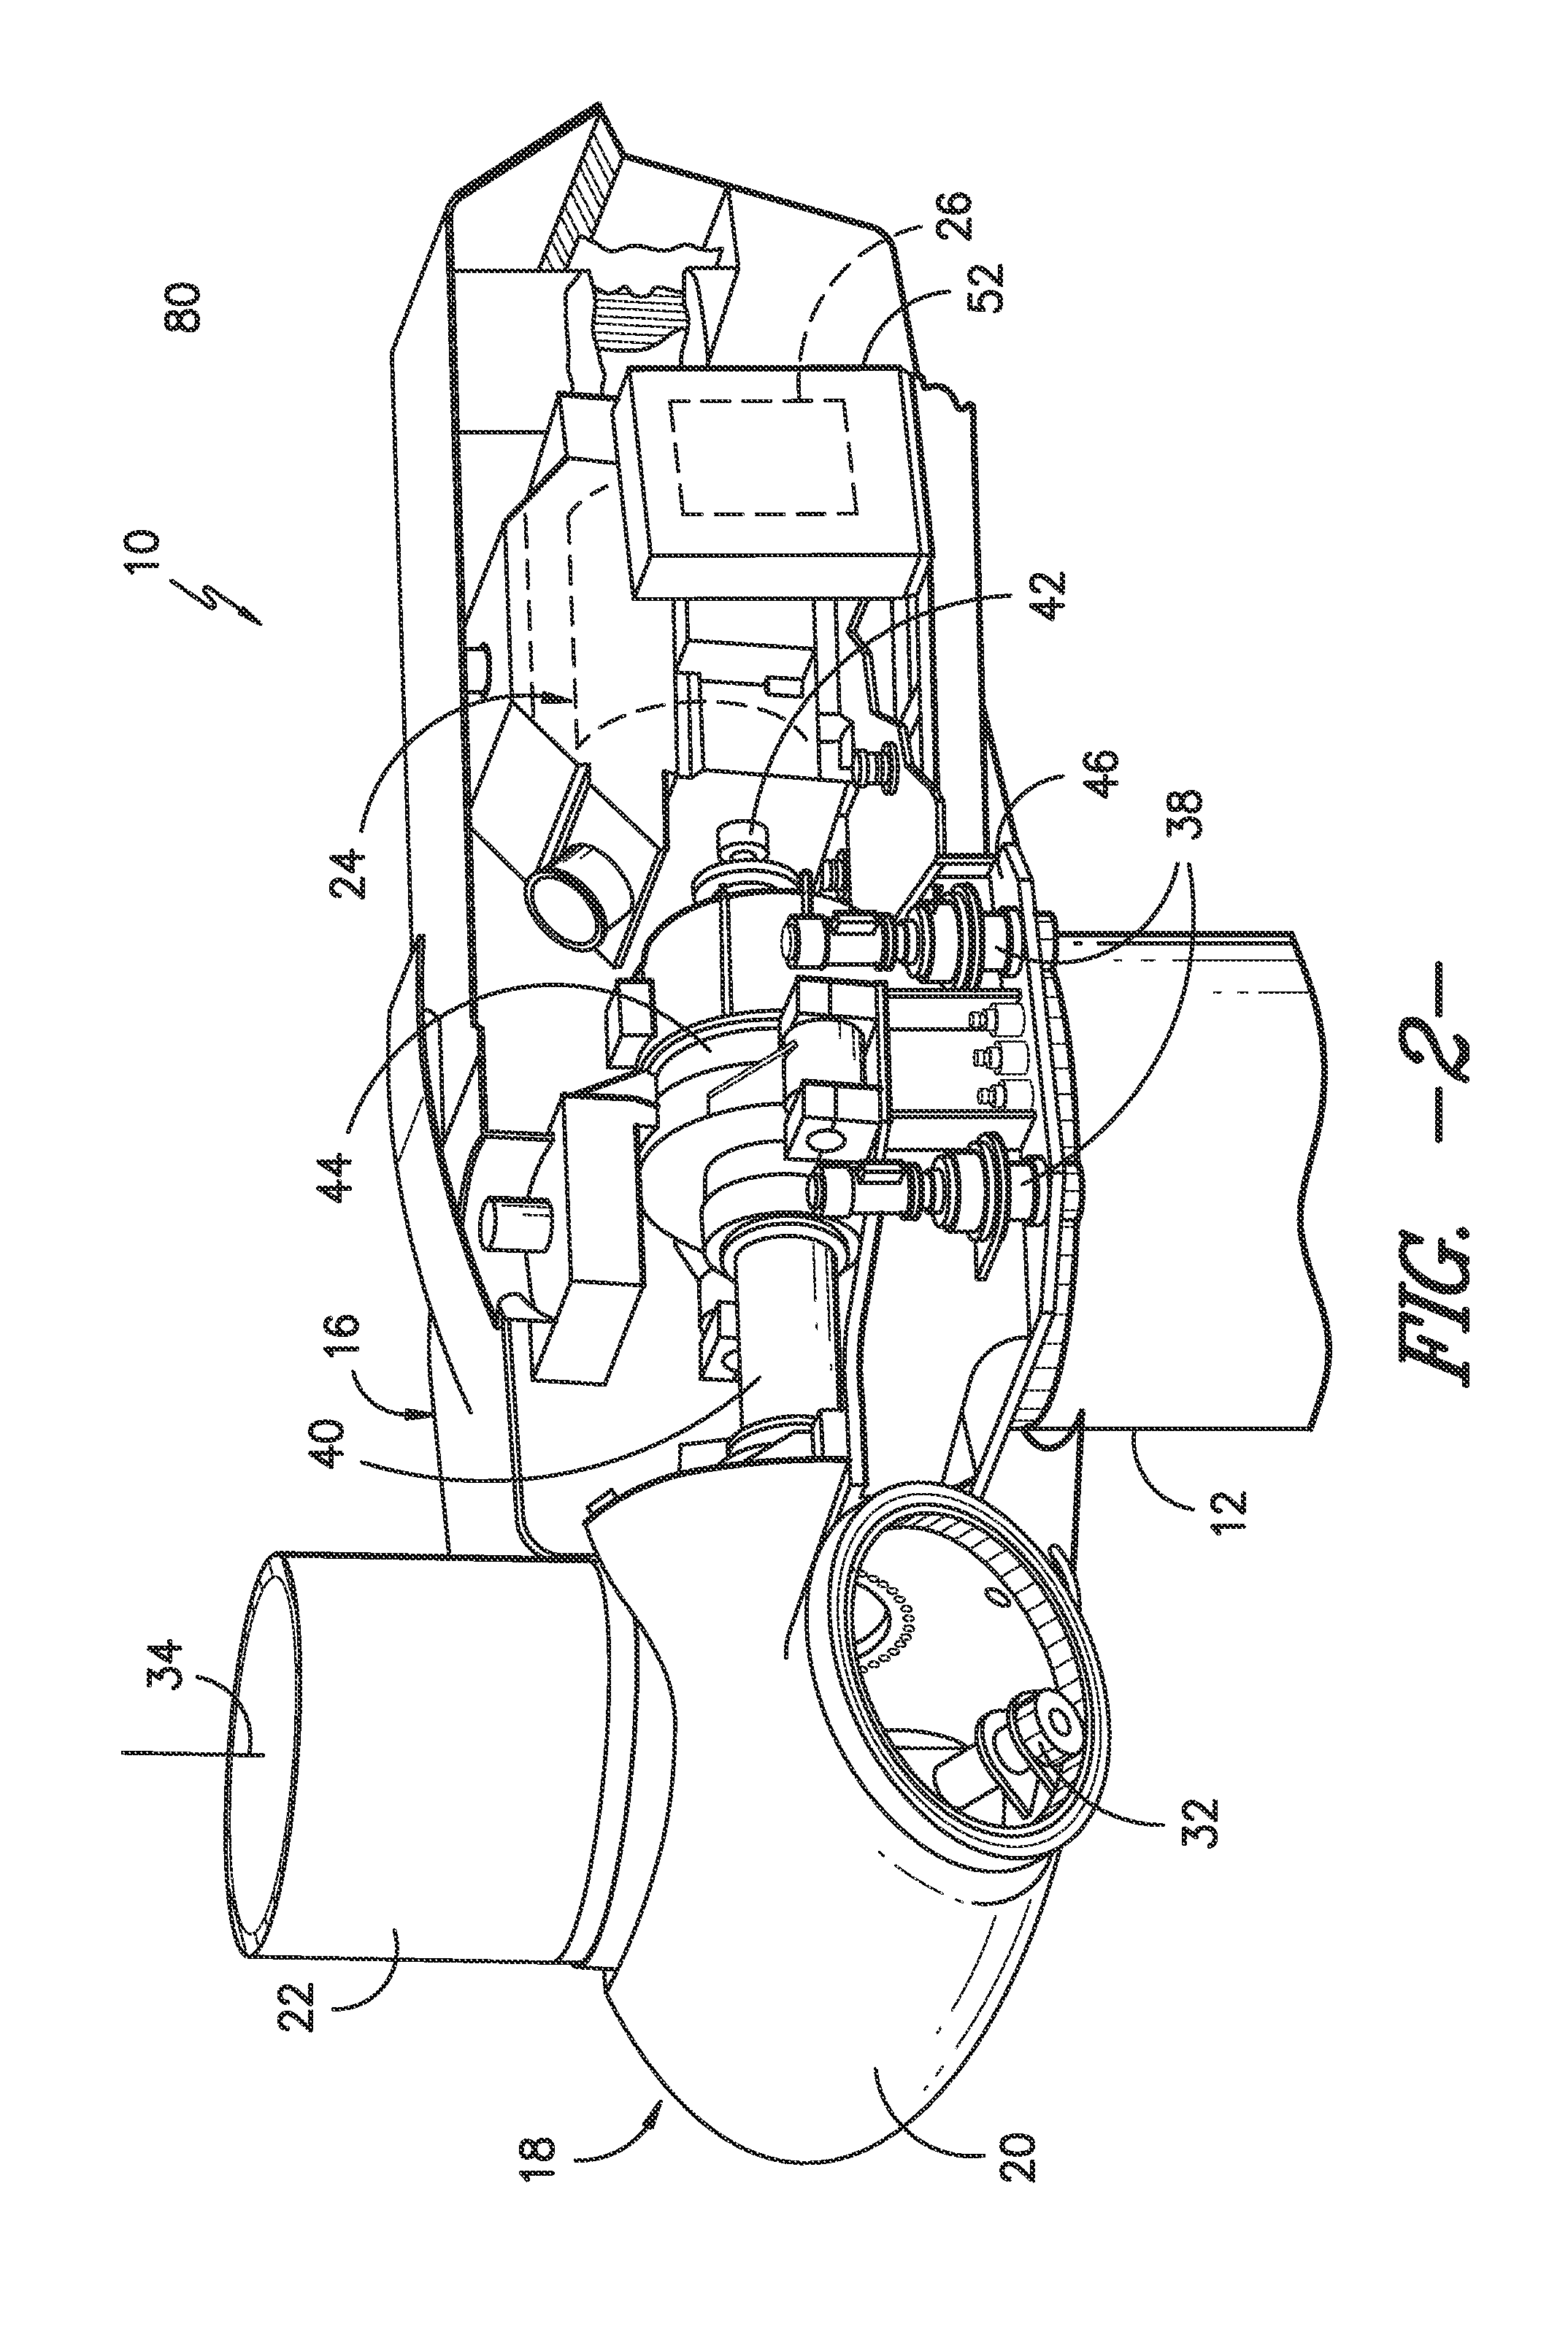 Wind turbine systems and methods for operating the same